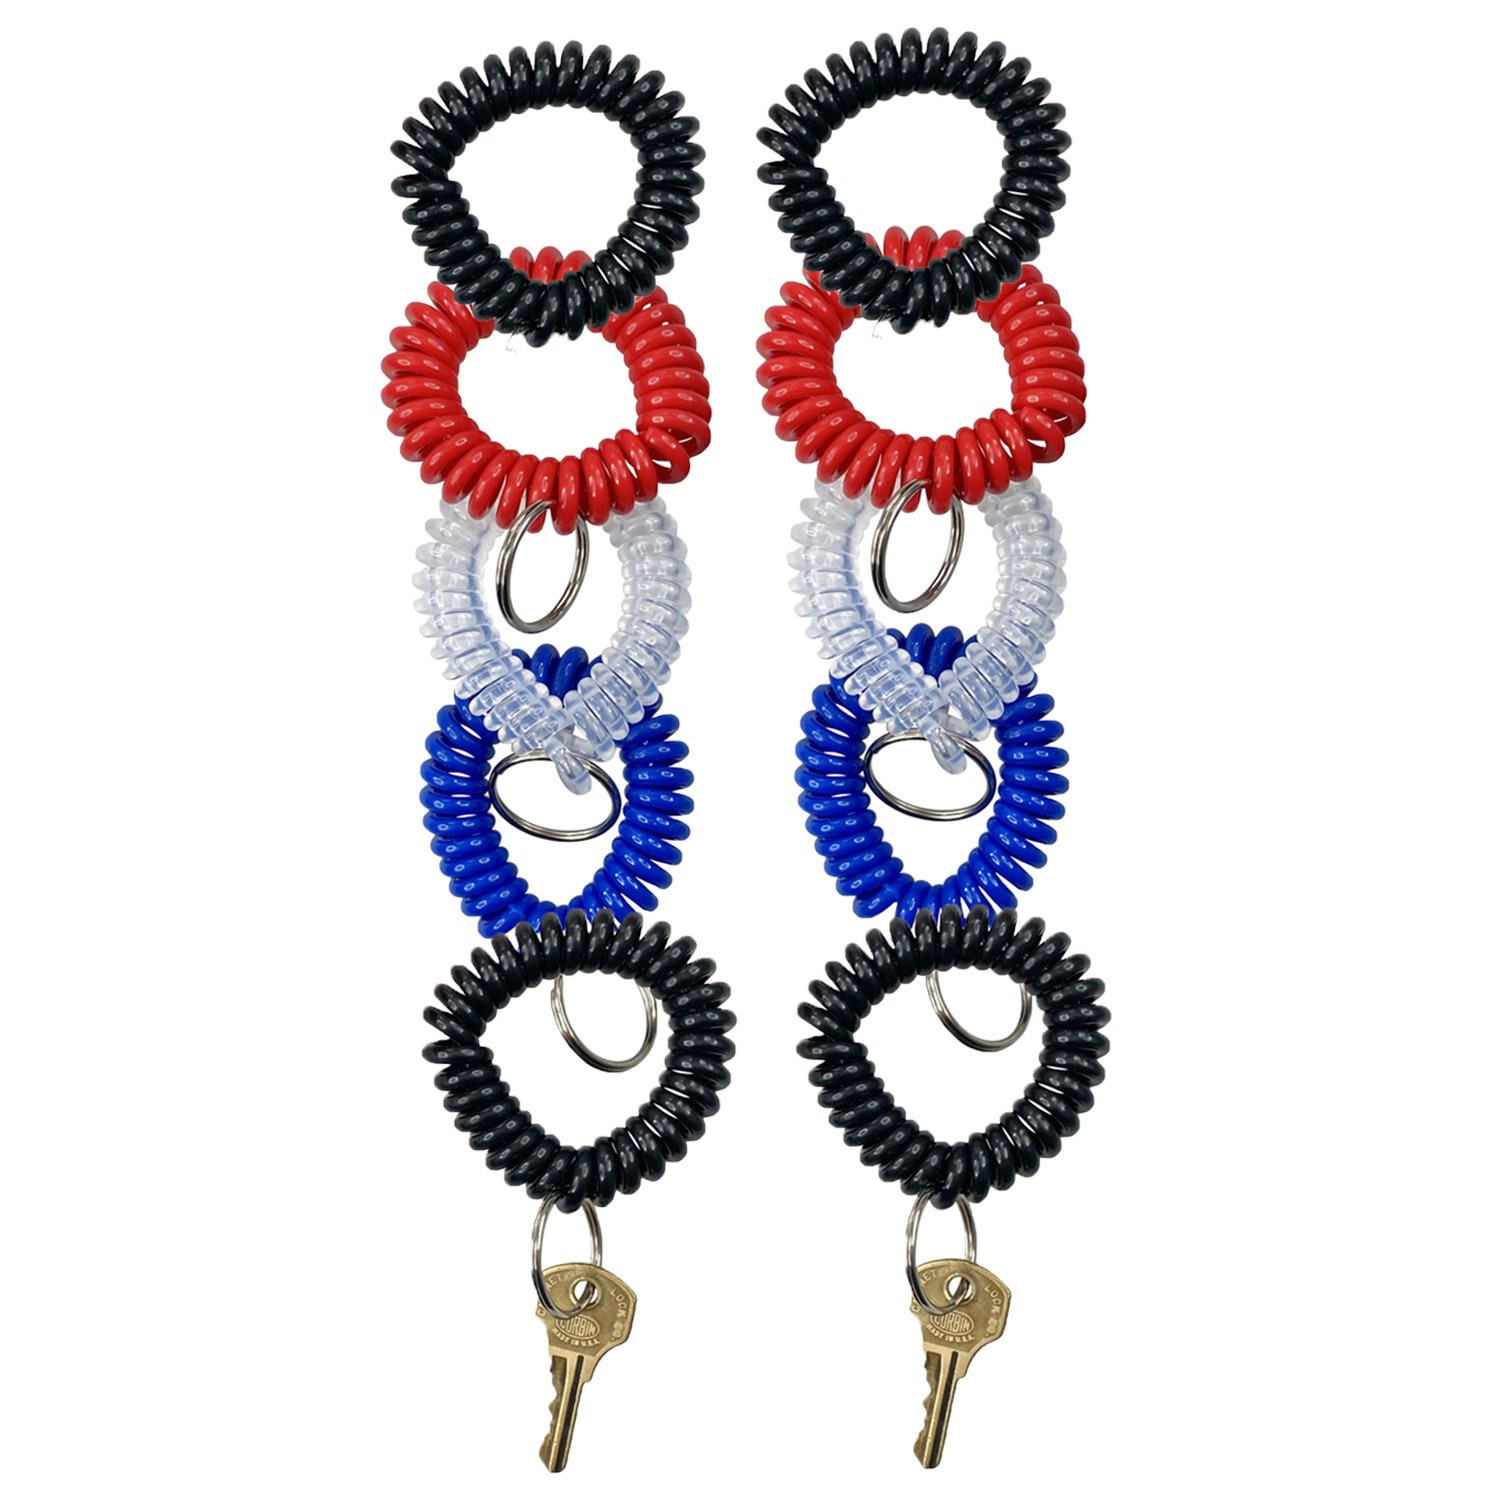 Wrist Coil Key Chain, Pack of 10